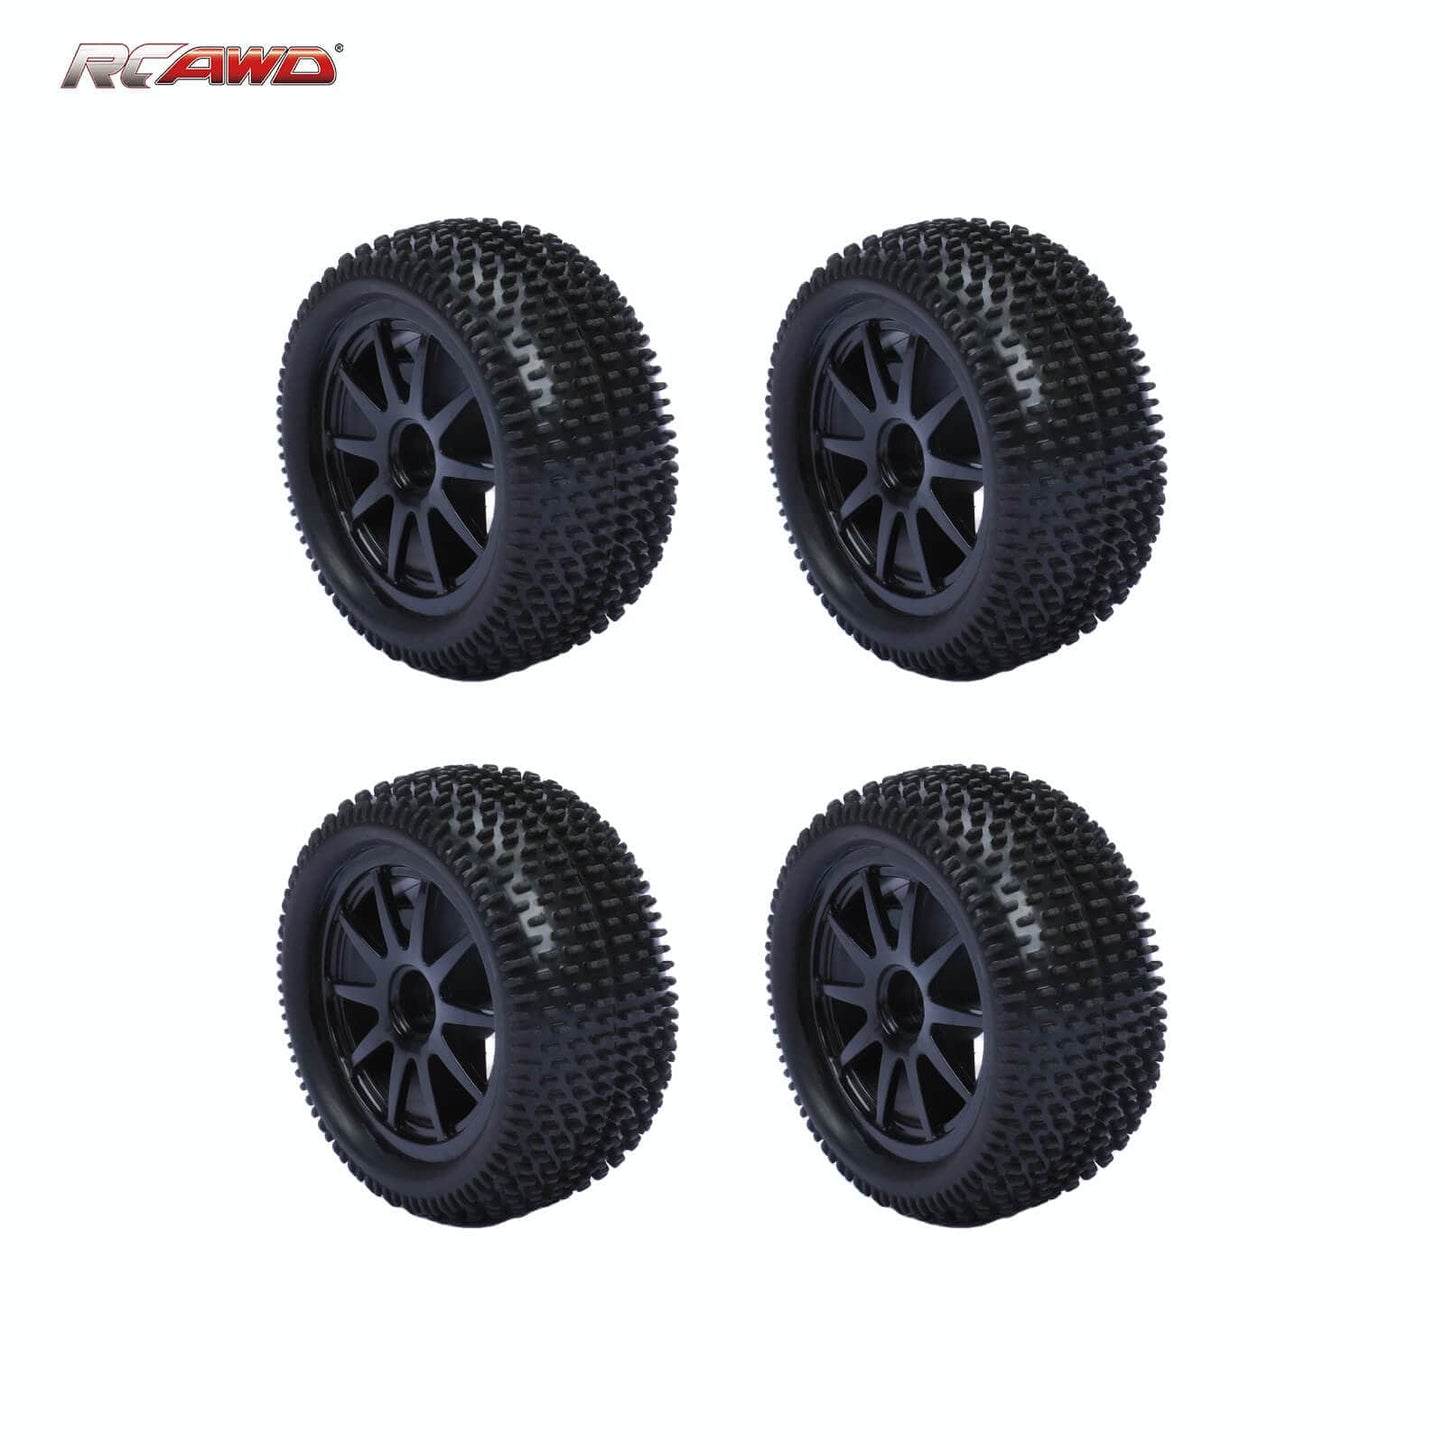 RCAWD Amazon RC Wheel & Tires 10 spokes RCAWD 2.05'' 82*40mm 1/16 Pre-glued RC off-road Buggy wheel Tires LG-009BL LG-010BL